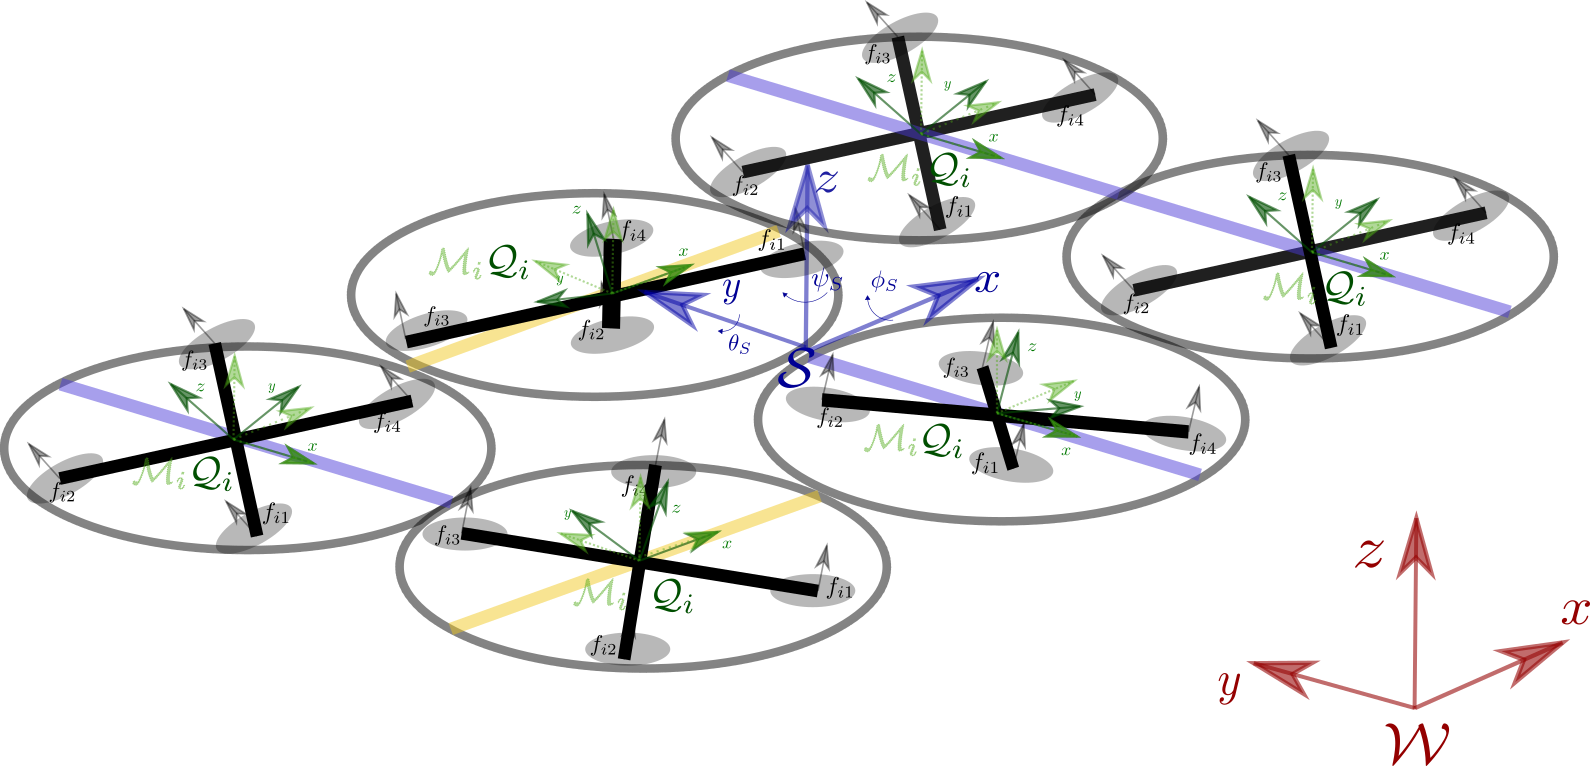 Finding Structure Configurations for Flying Modular Robots